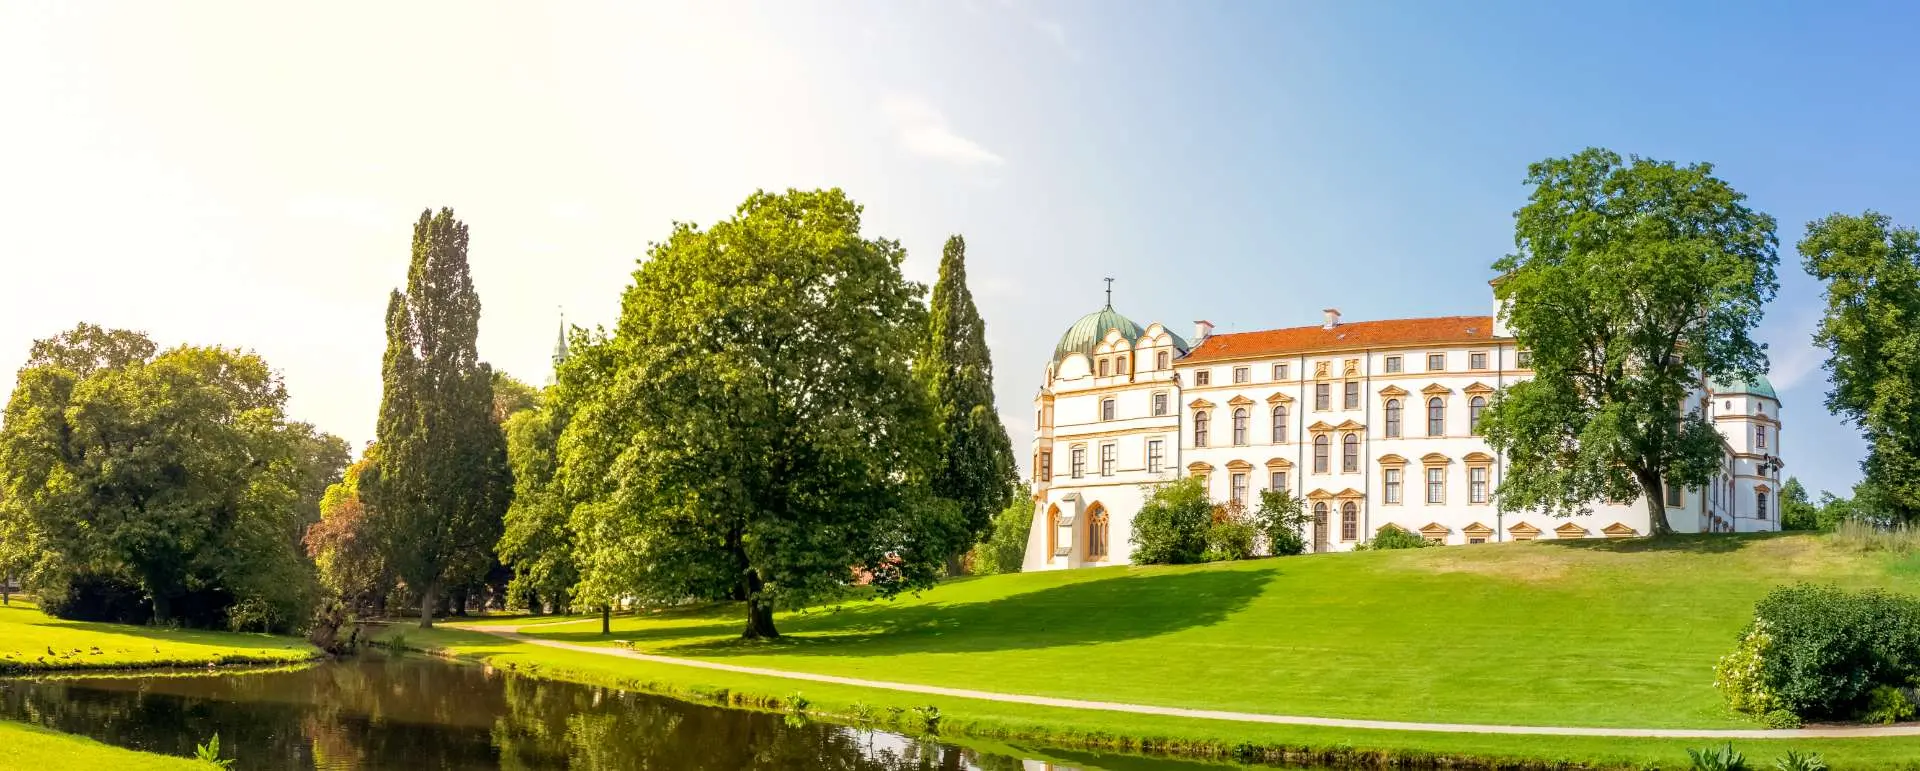 Lower Saxony - the destination for group hotel for wine tastings